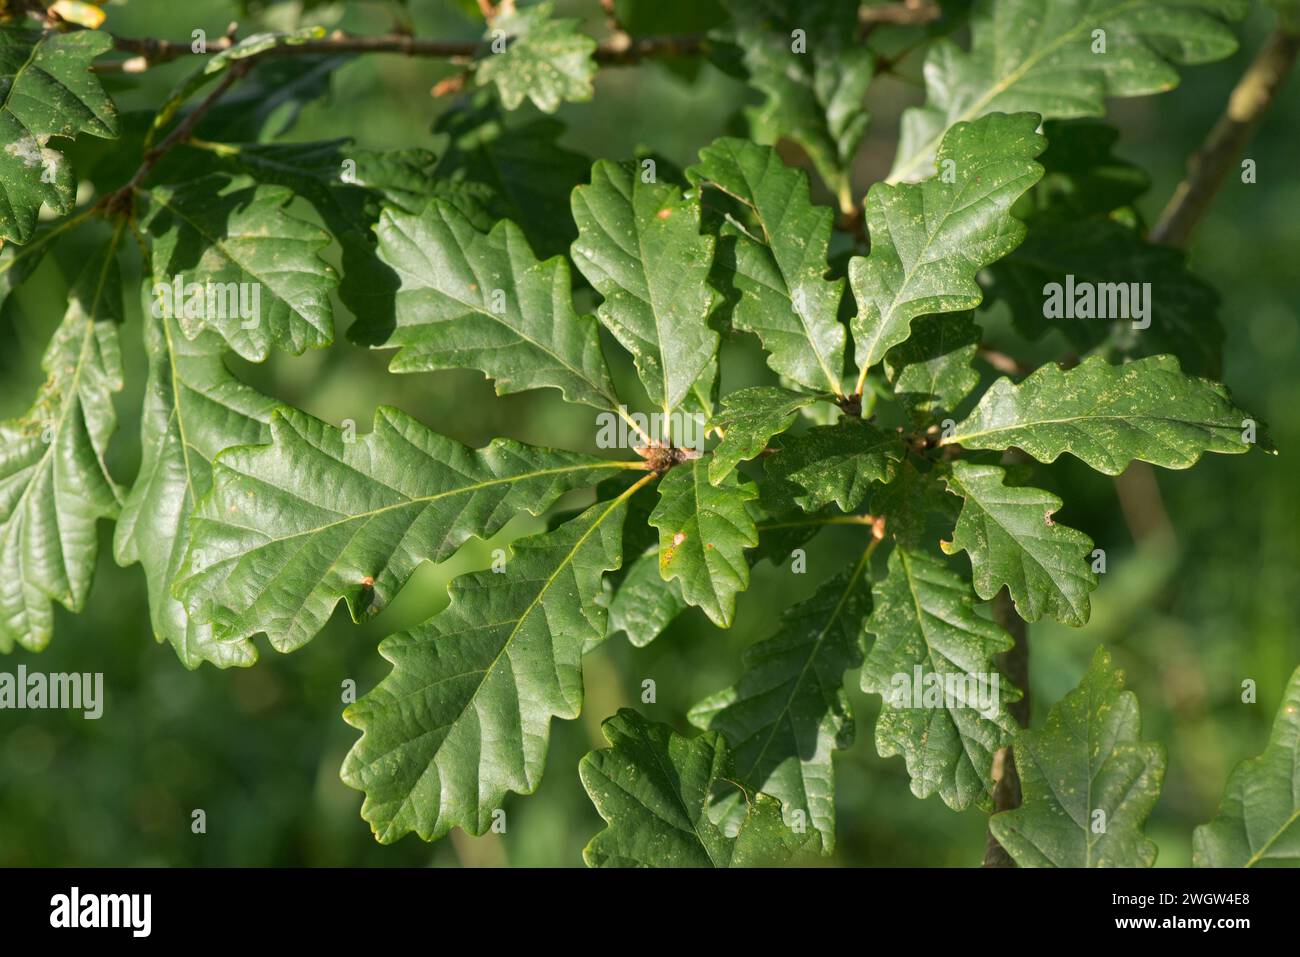 Old mature oak tree (Quercus robur) leaves in early autumn before changing colour, Berkshire, October Stock Photo